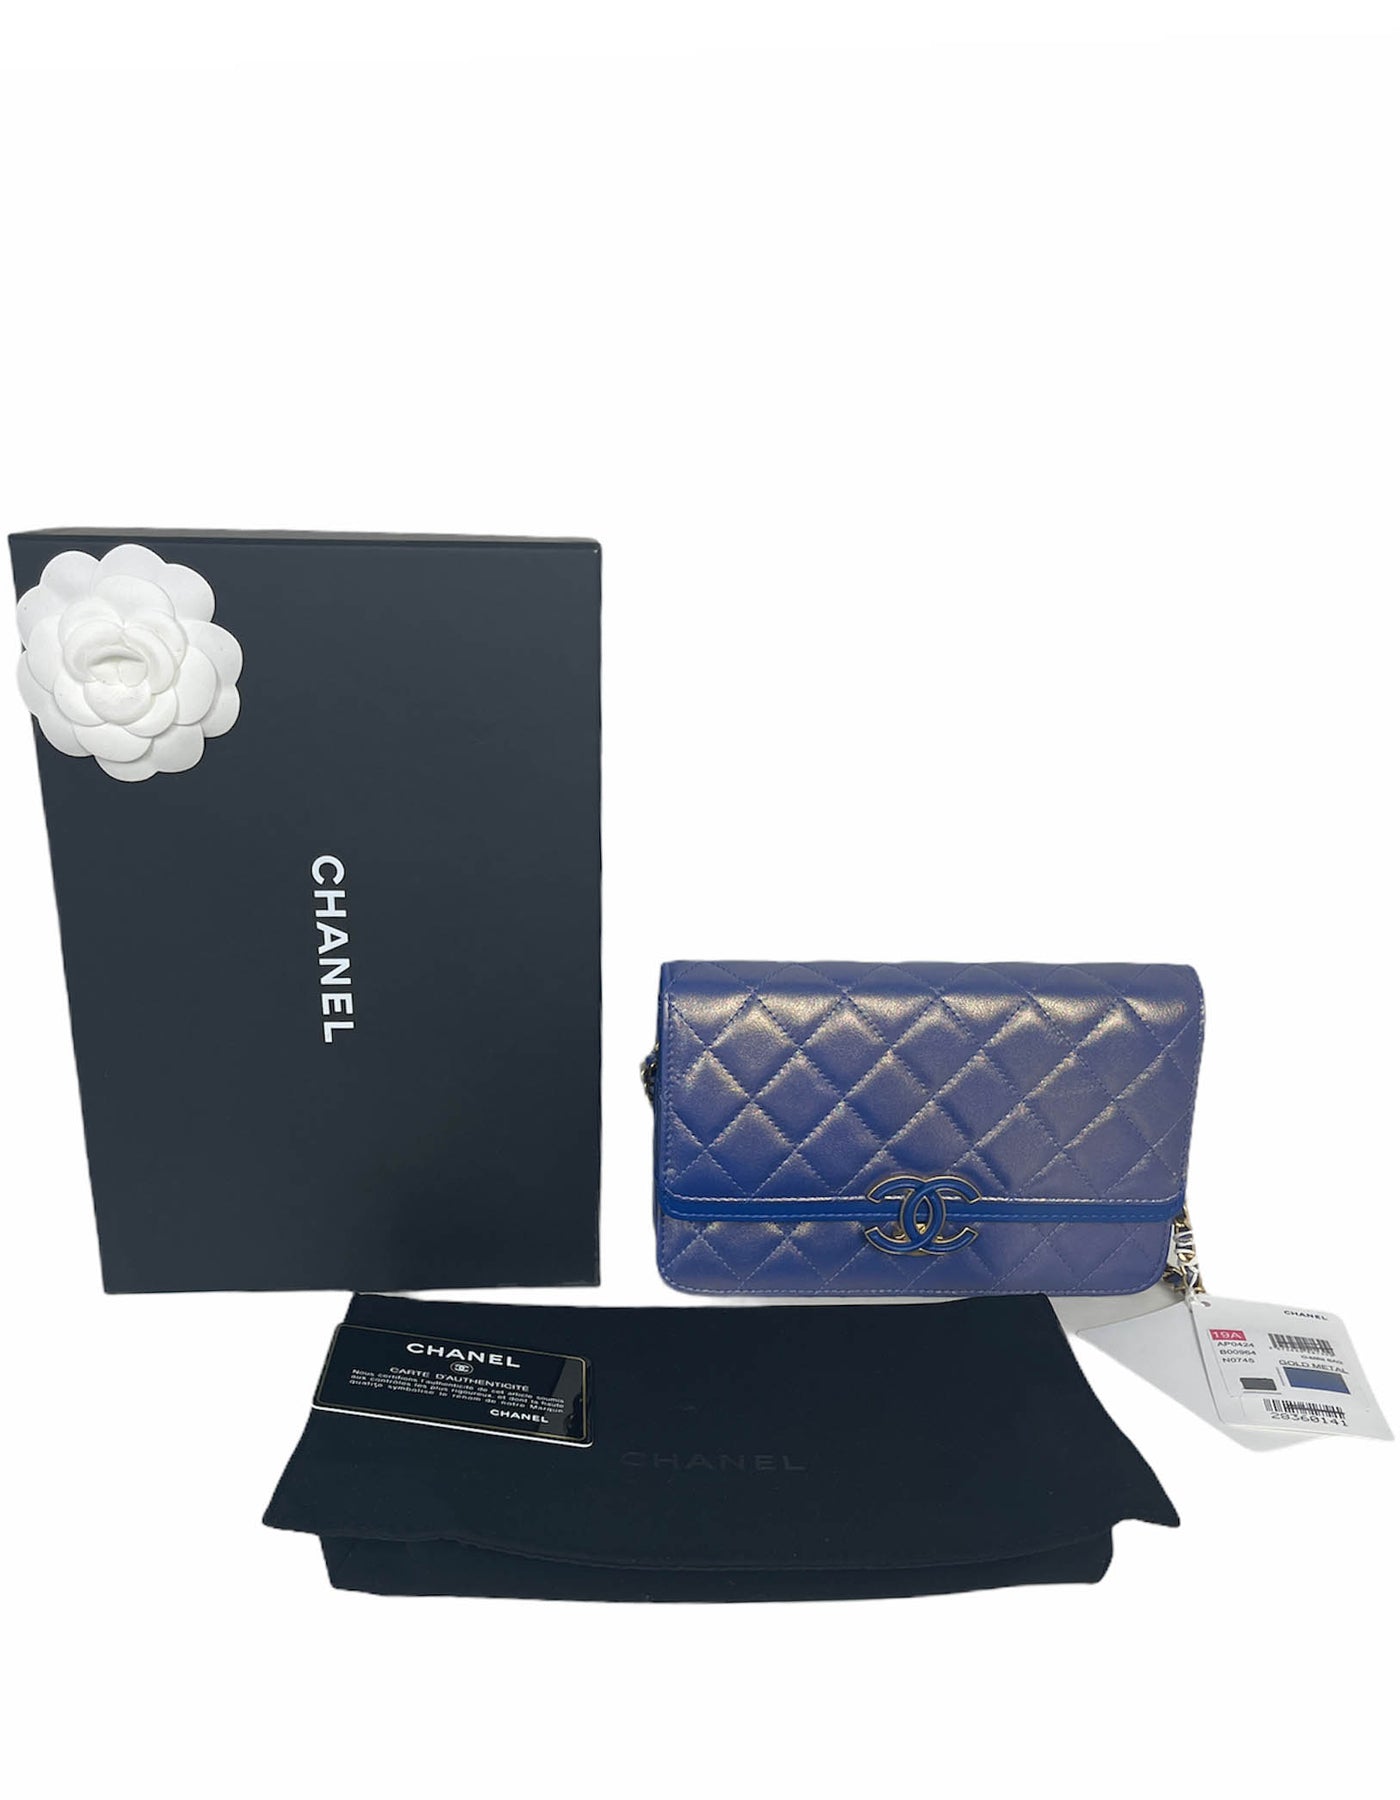 CHANEL, Accessories, Channel Navy Quilted Wallet